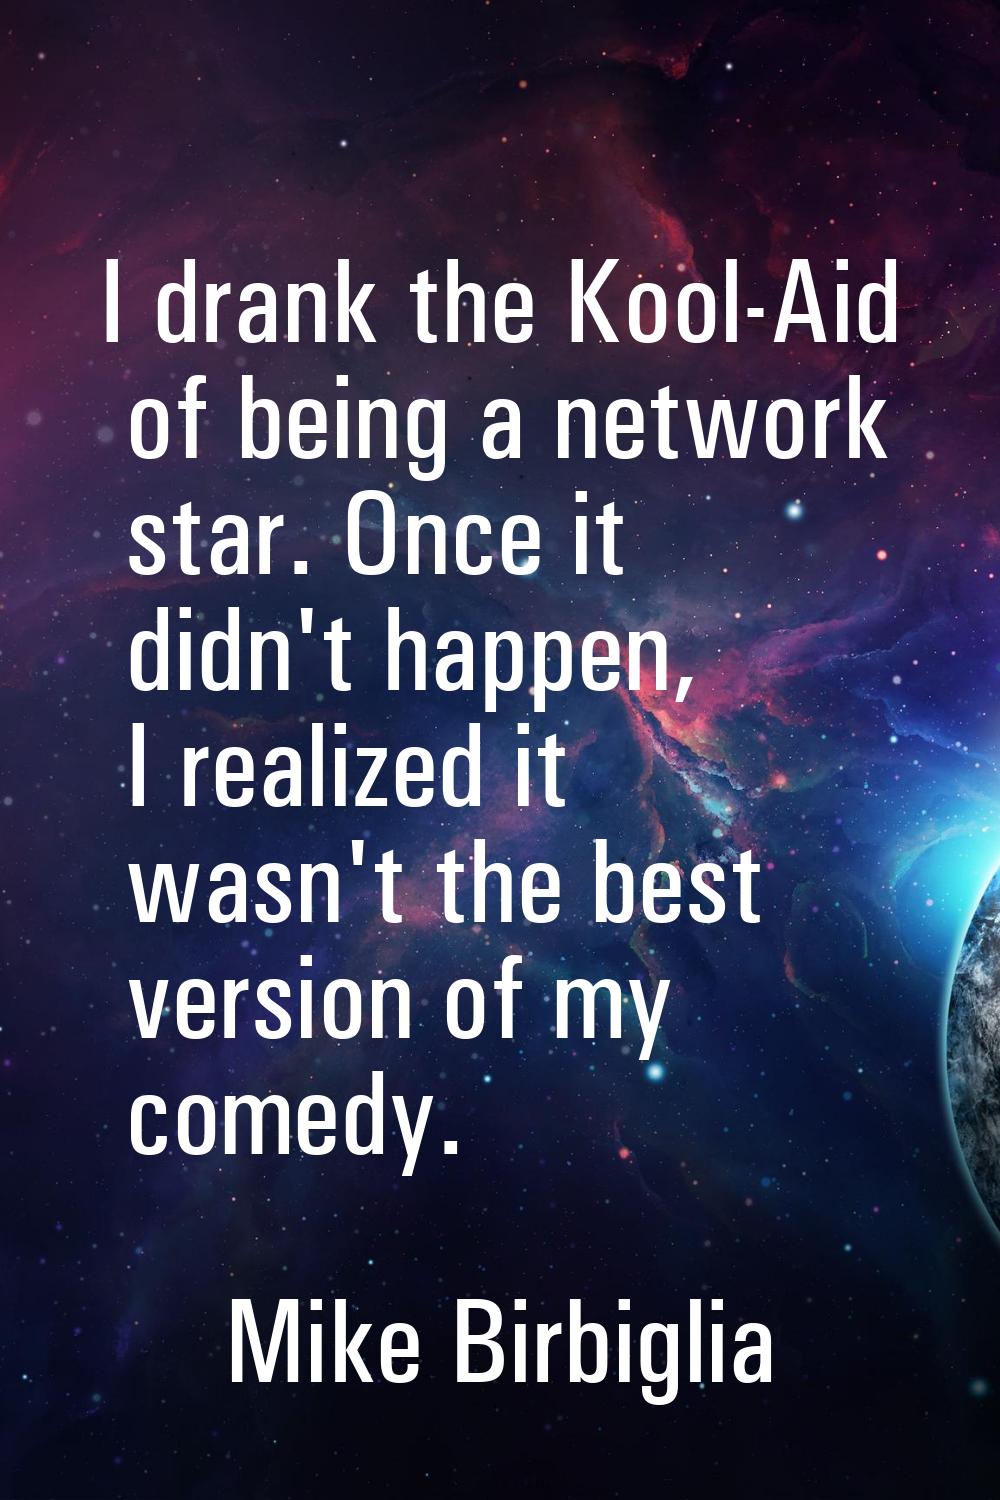 I drank the Kool-Aid of being a network star. Once it didn't happen, I realized it wasn't the best 